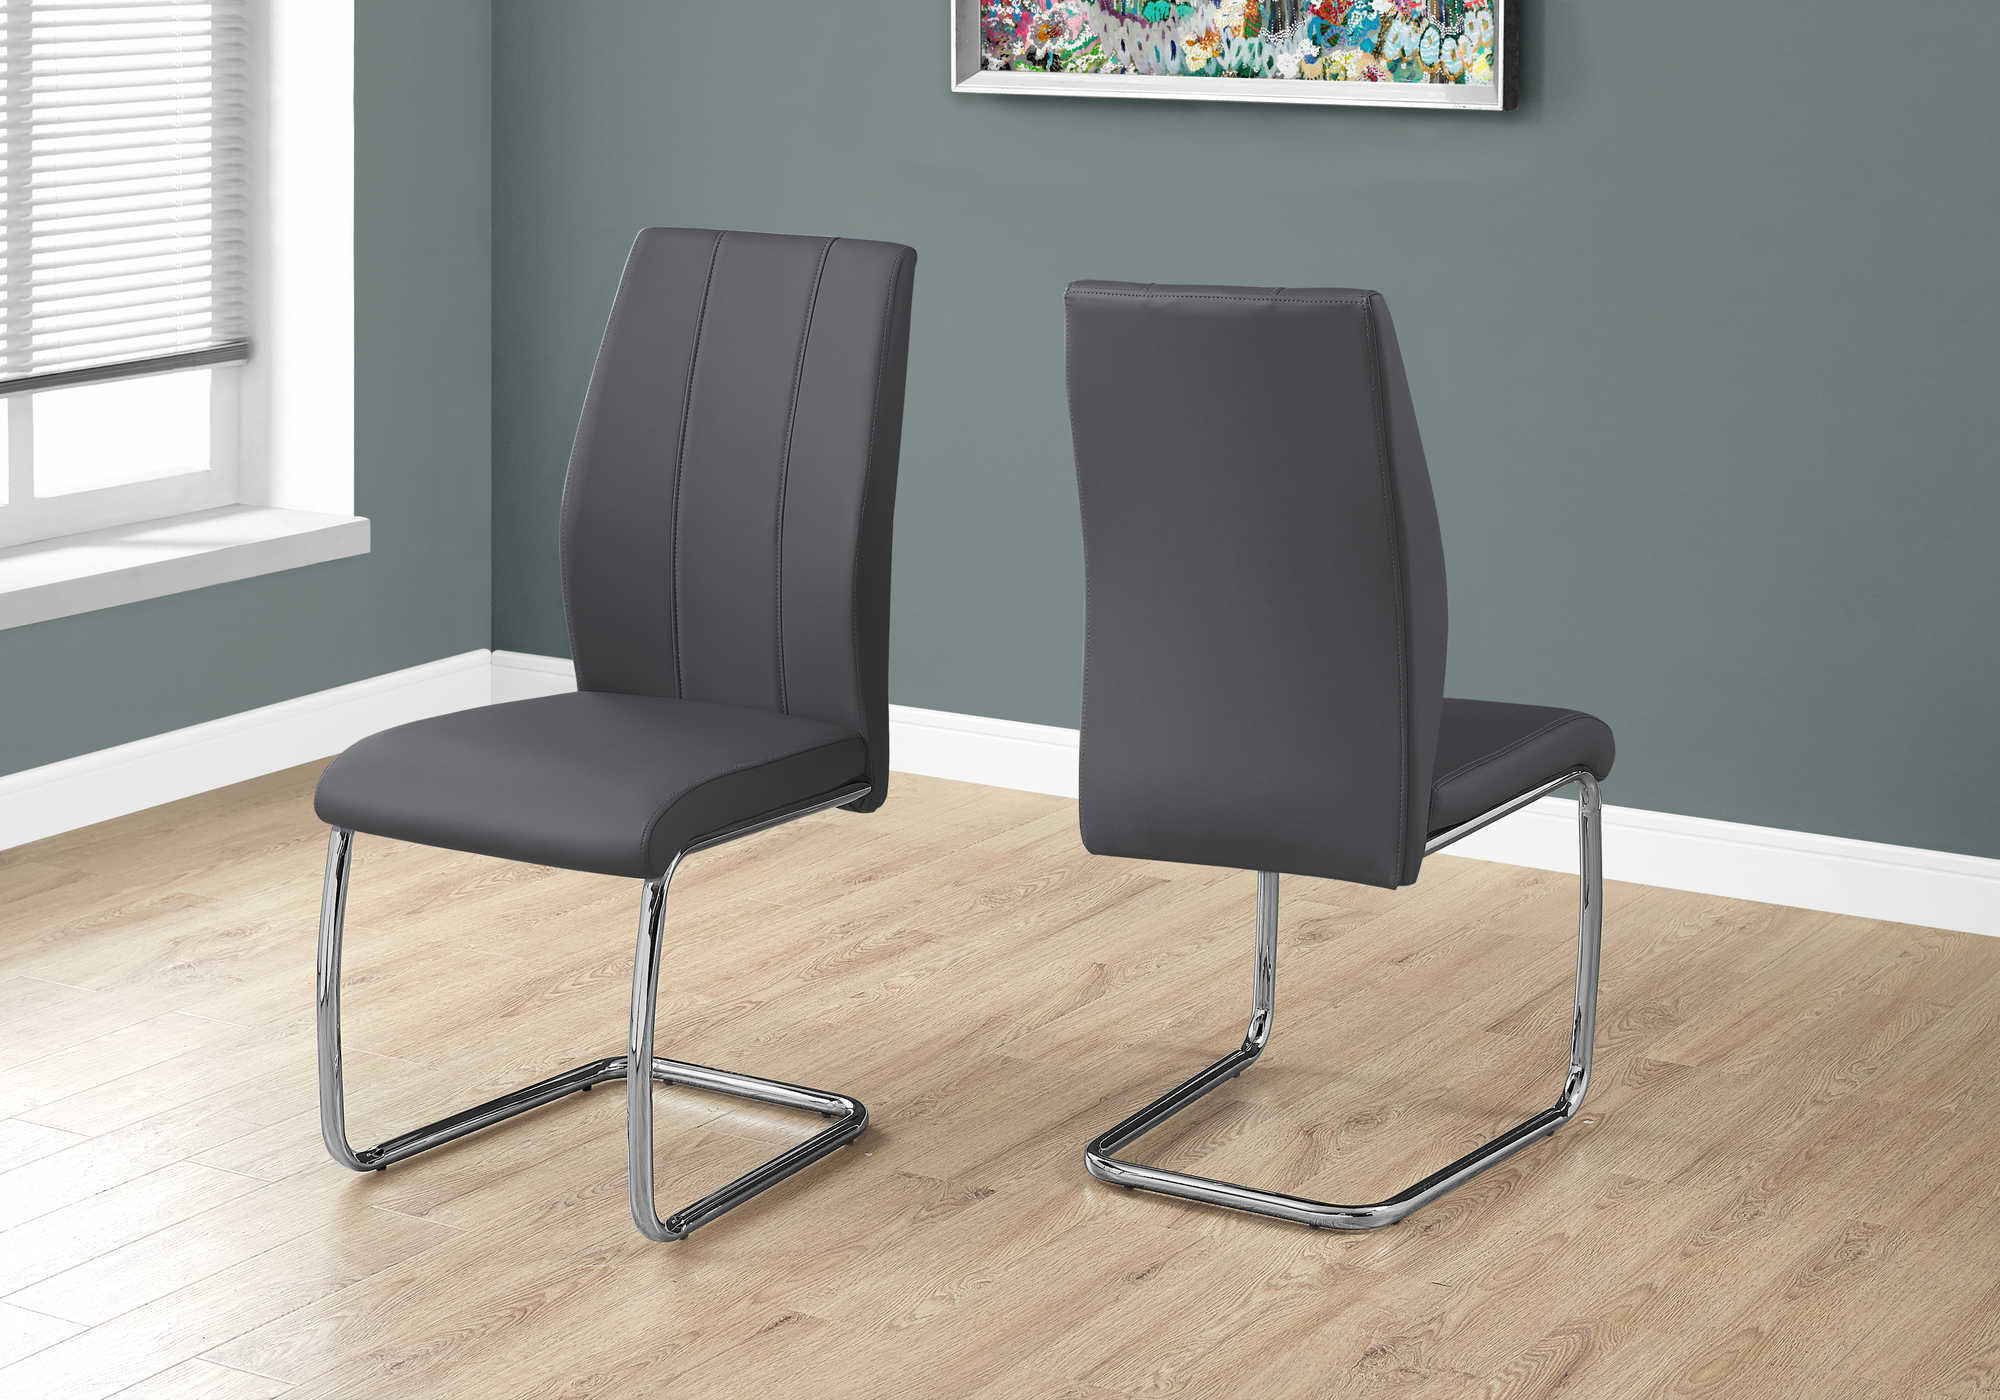 DINING CHAIR - 2PCS / 39"H / GREY LEATHER-LOOK / CHROME